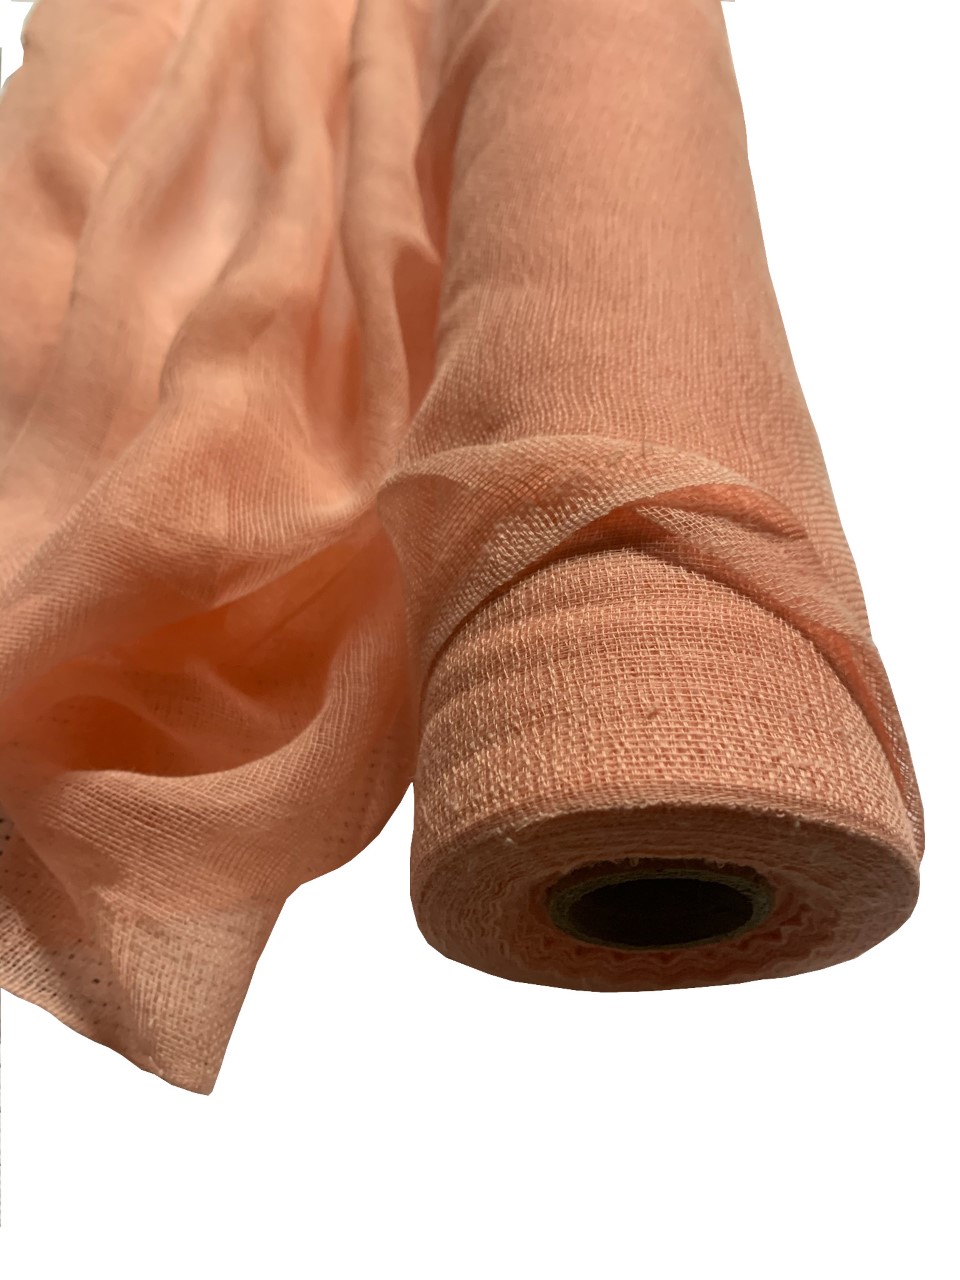 Peach Cheesecloth 36" x 100 Foot Roll - 100% Cotton